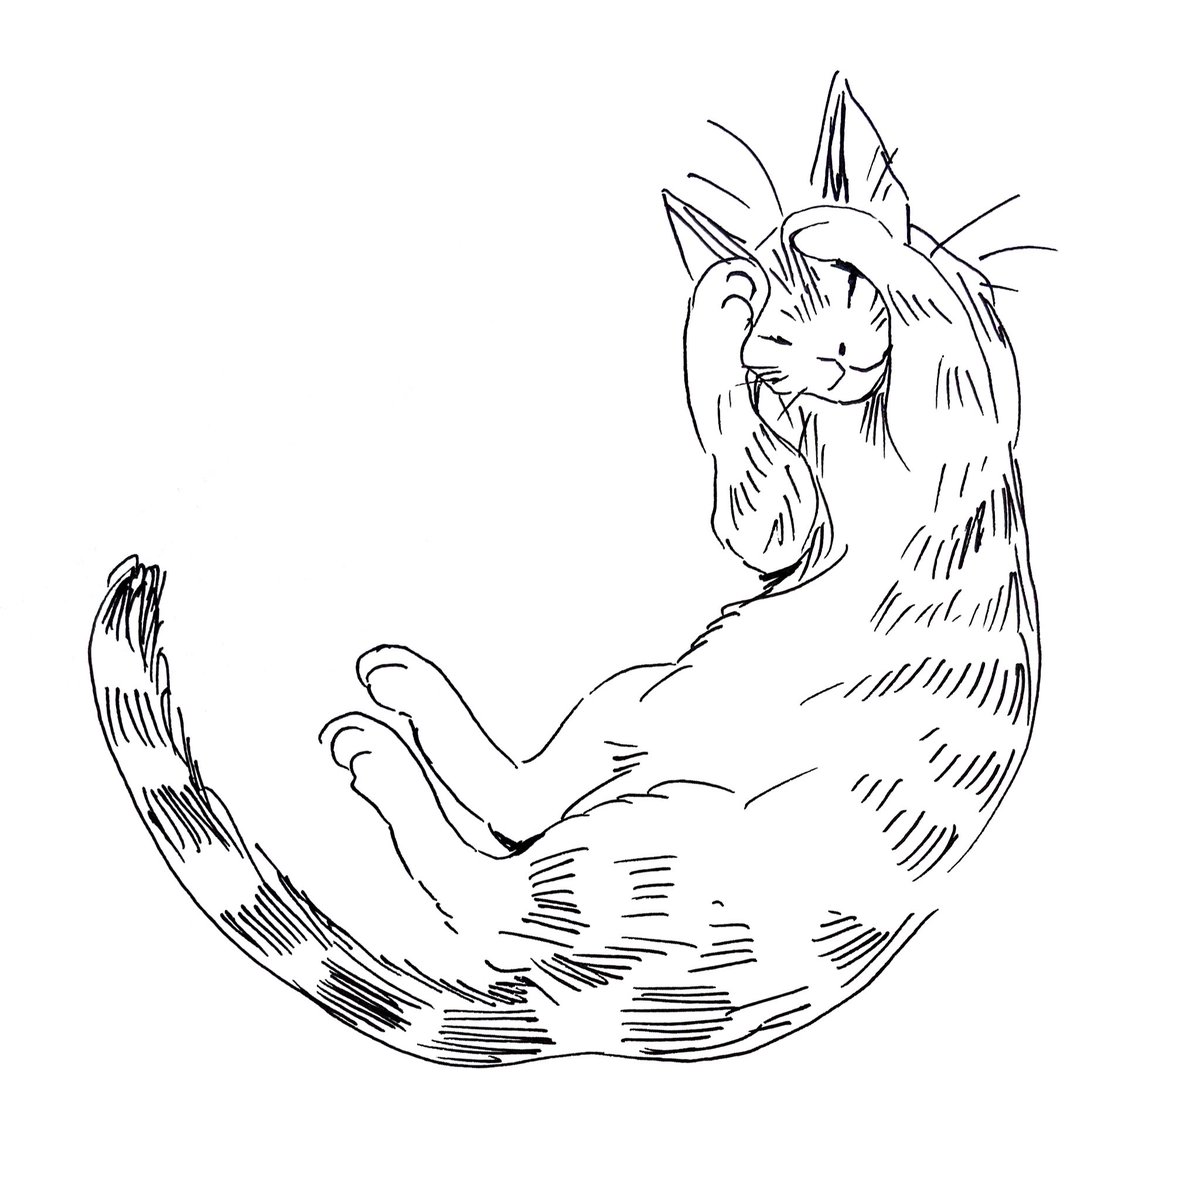 I'll be sketching cats this weekend! Make a $30+ donation to a BLM charity of your choice and comment with a timestamped screencap below + a pic of the cat I should draw (can be your pet or any other cat, you decide) ? 
Only new donations! 
https://t.co/kRg5PBPJPi 